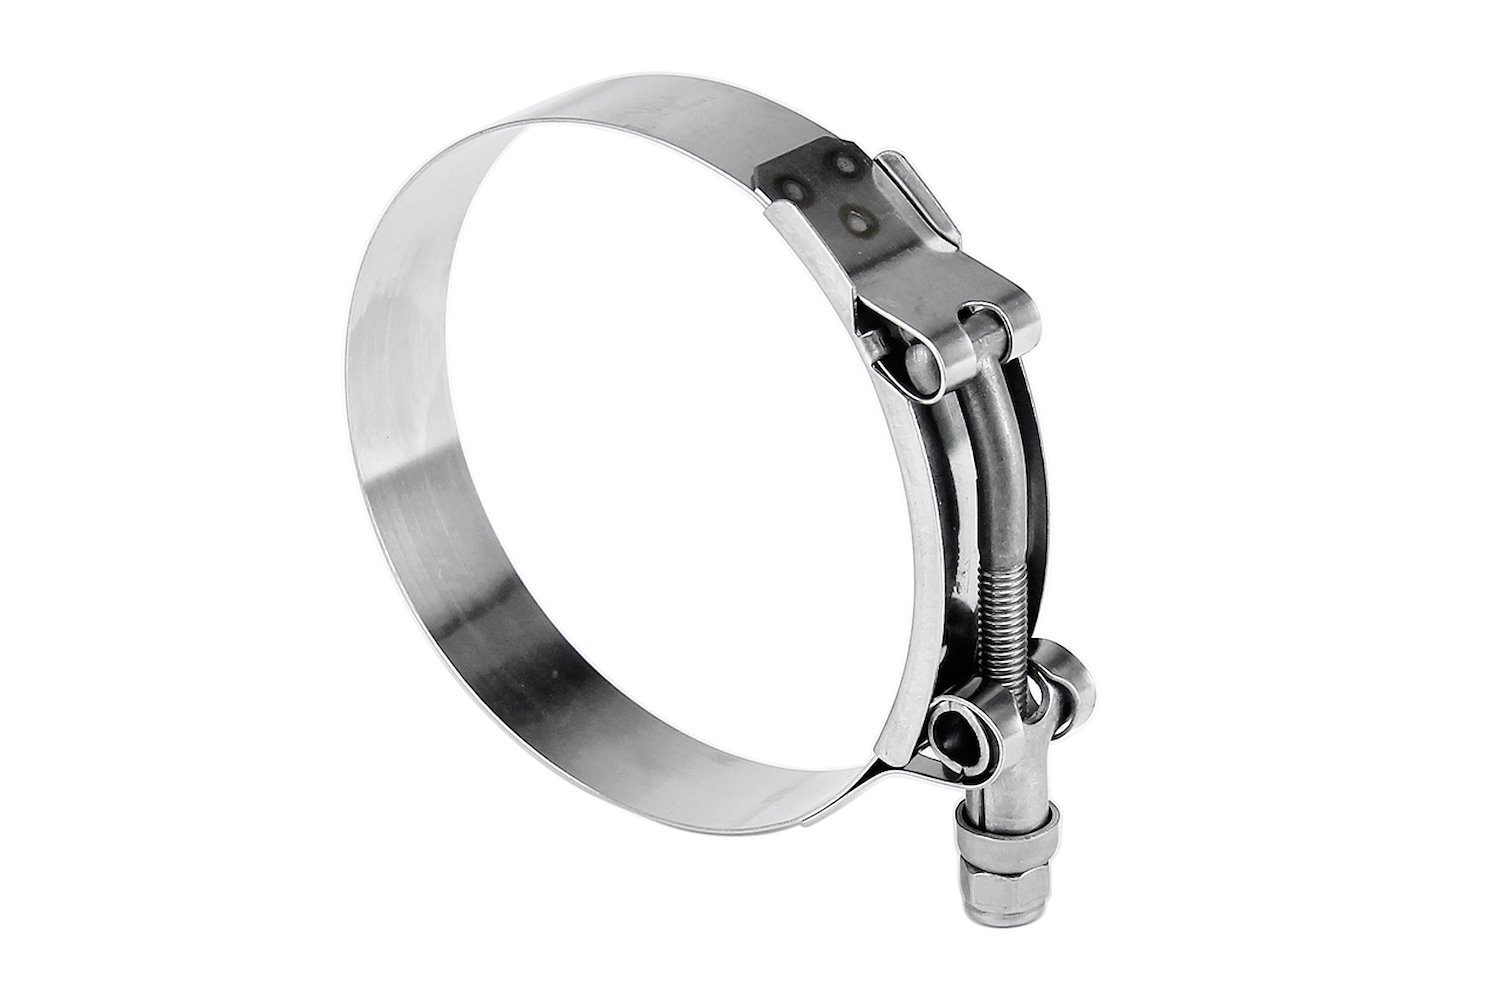 316-SSTC-70-78 100-Percent Marine Grade Stainless Steel T-Bolt Hose Clamp, Size #60, Range: 2.75 in.- 3.07 in.